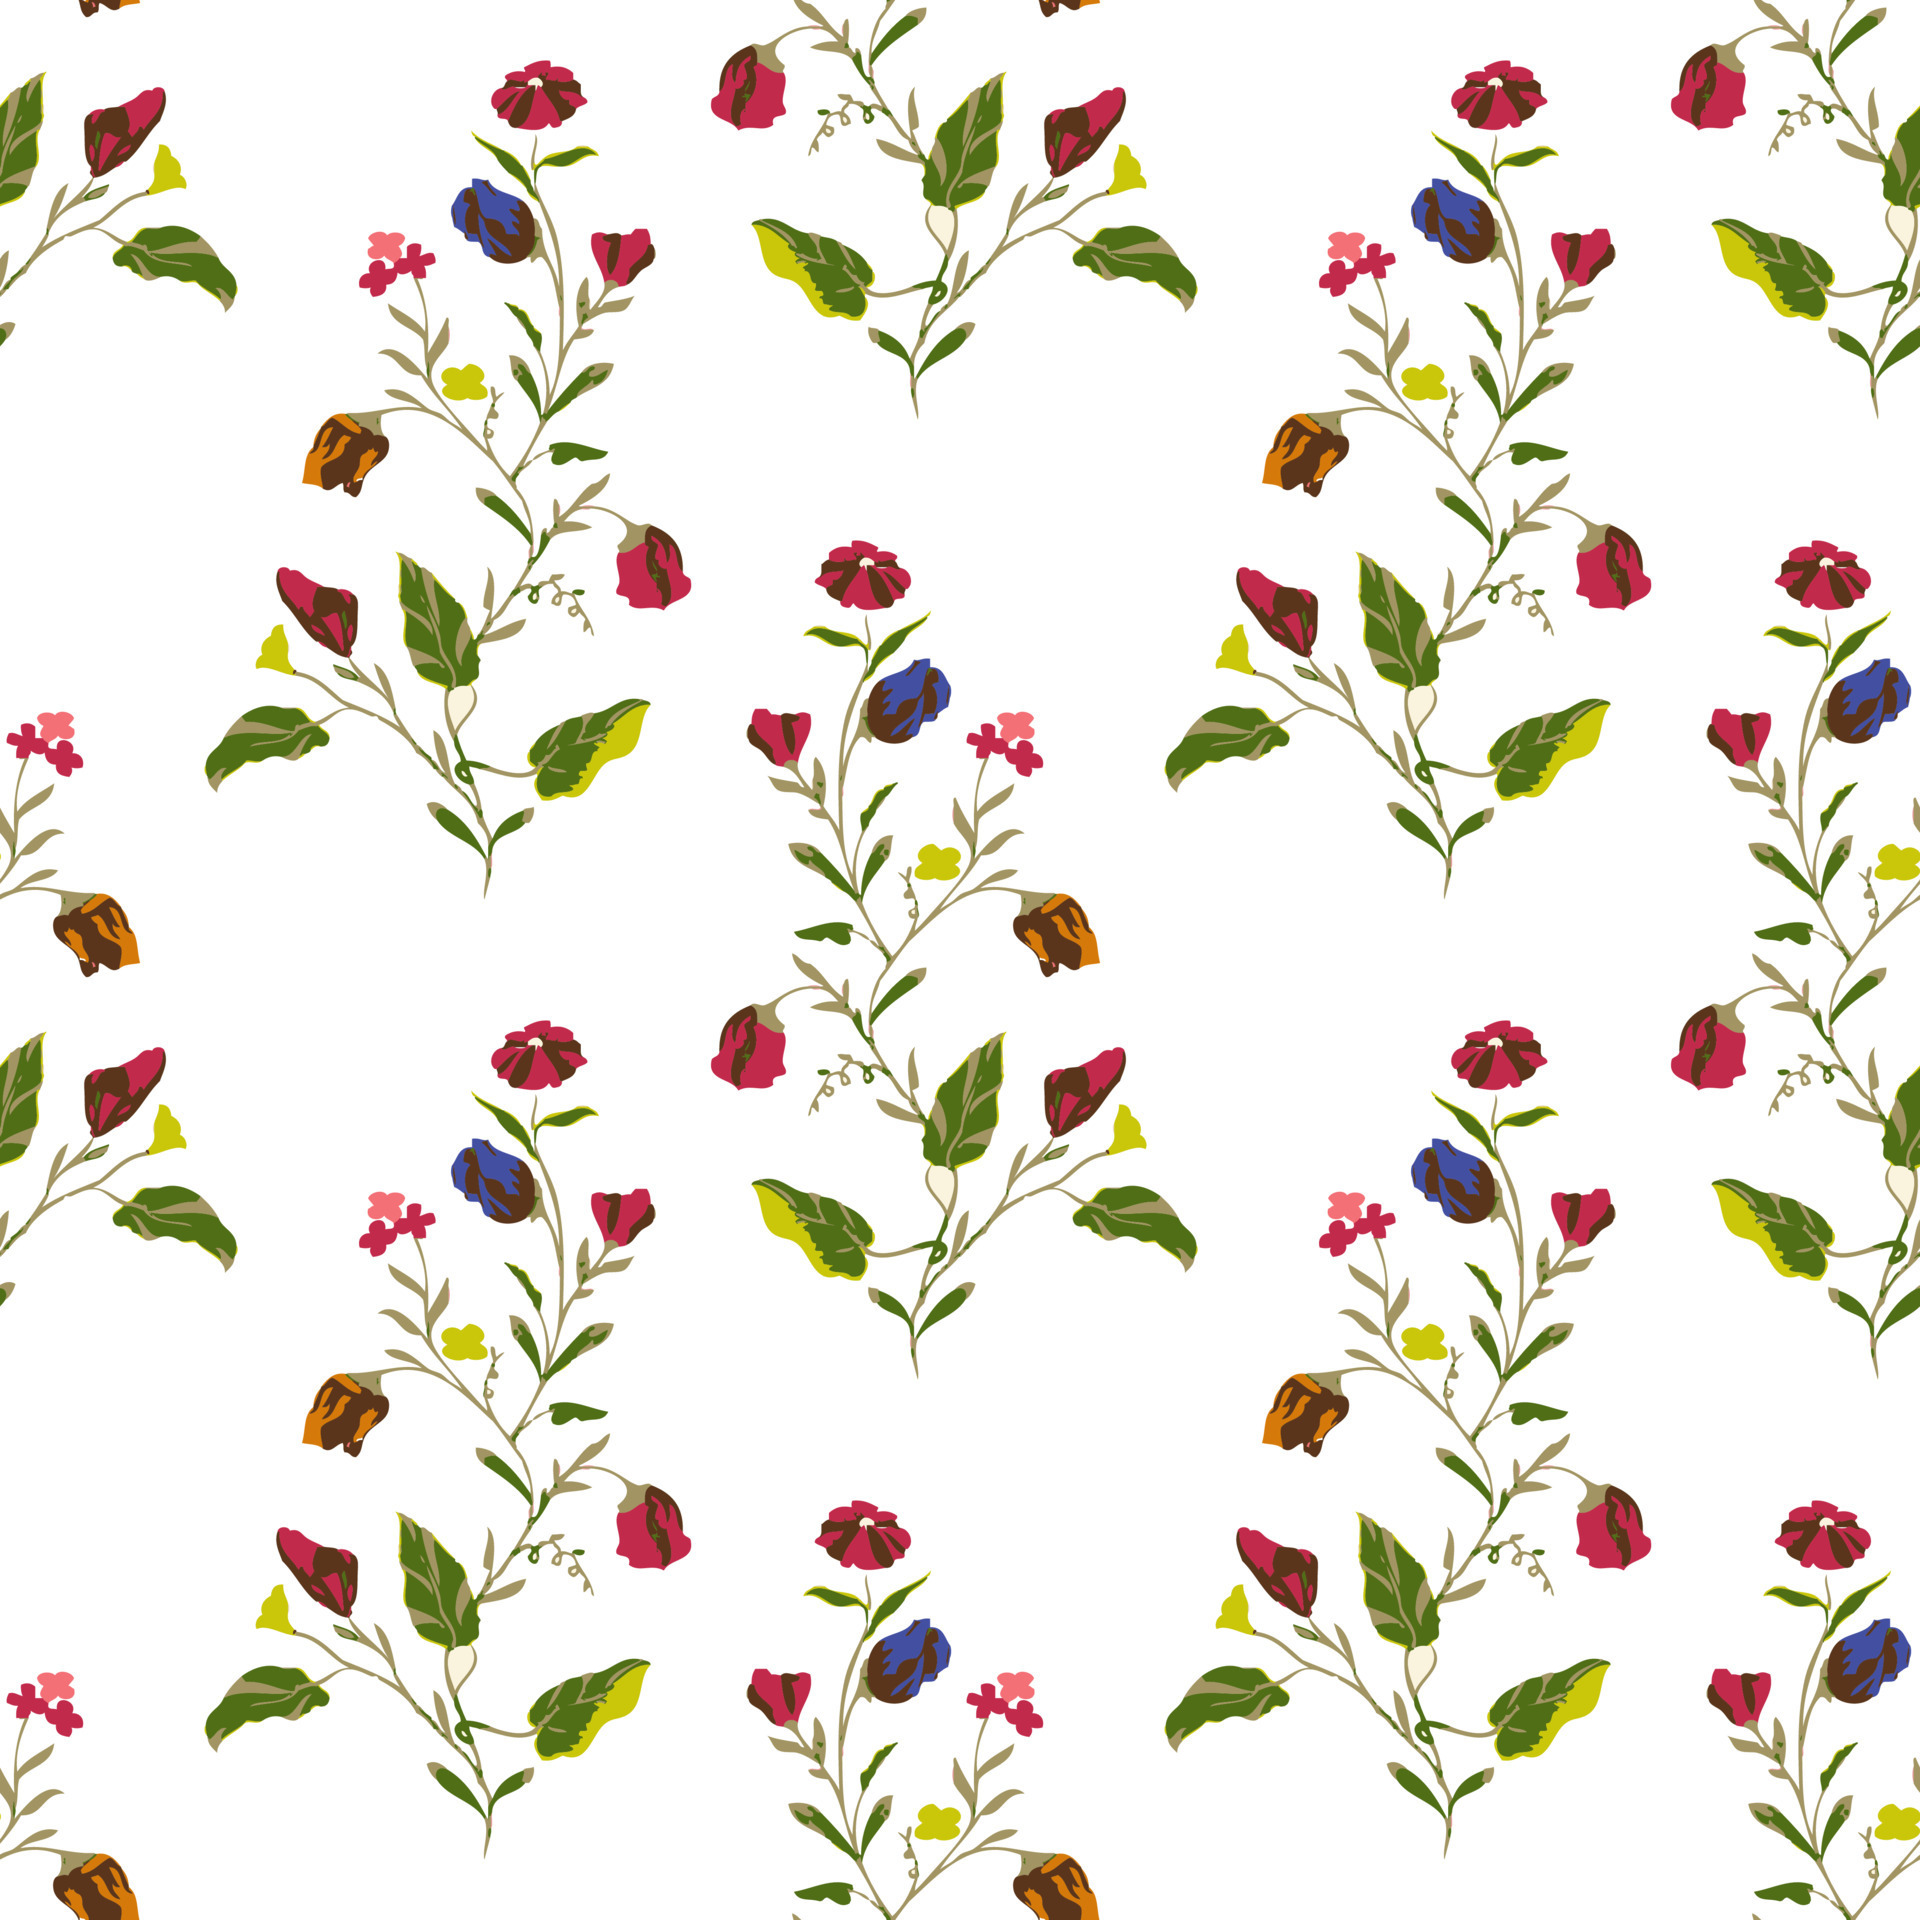 Seamless Floral Pattern Pattern Wrapping Paper Stock Illustration 675112282